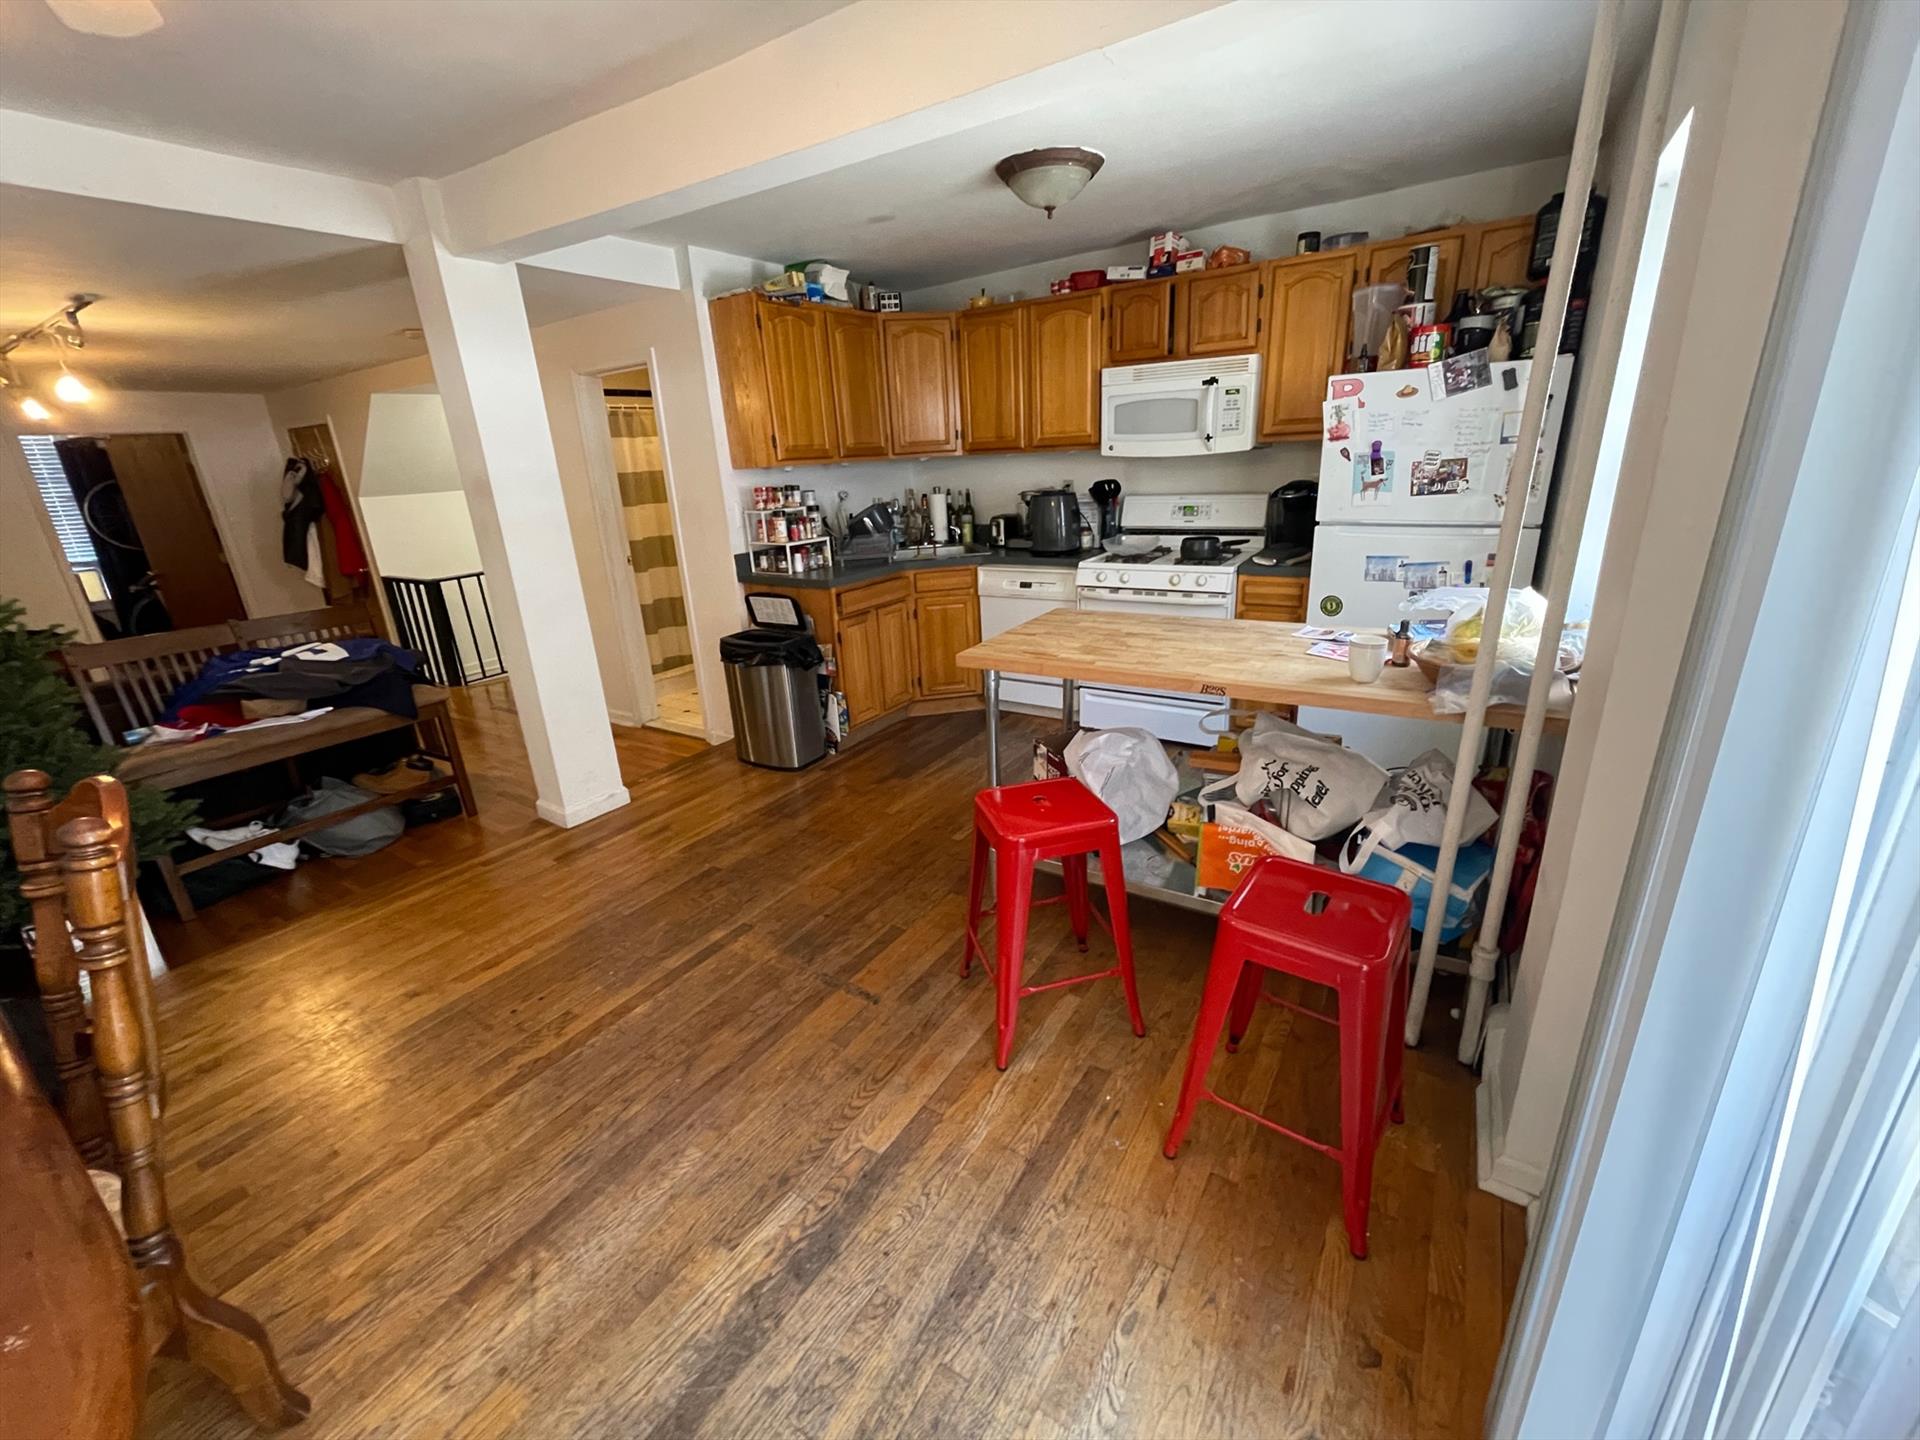 3 bed 3 bath duplex apartment with amazing PRIVATE YARD in the best location in Hoboken and in unit washer/ dryer!!! All three bedrooms are a good size and will fit queens/ dressers, huge living room/ dining area, washer dryer in the unit, dishwasher and a private deck and yard makes this apartment the perfect share! Available 4/1/24. Broker fee paid by tenant.